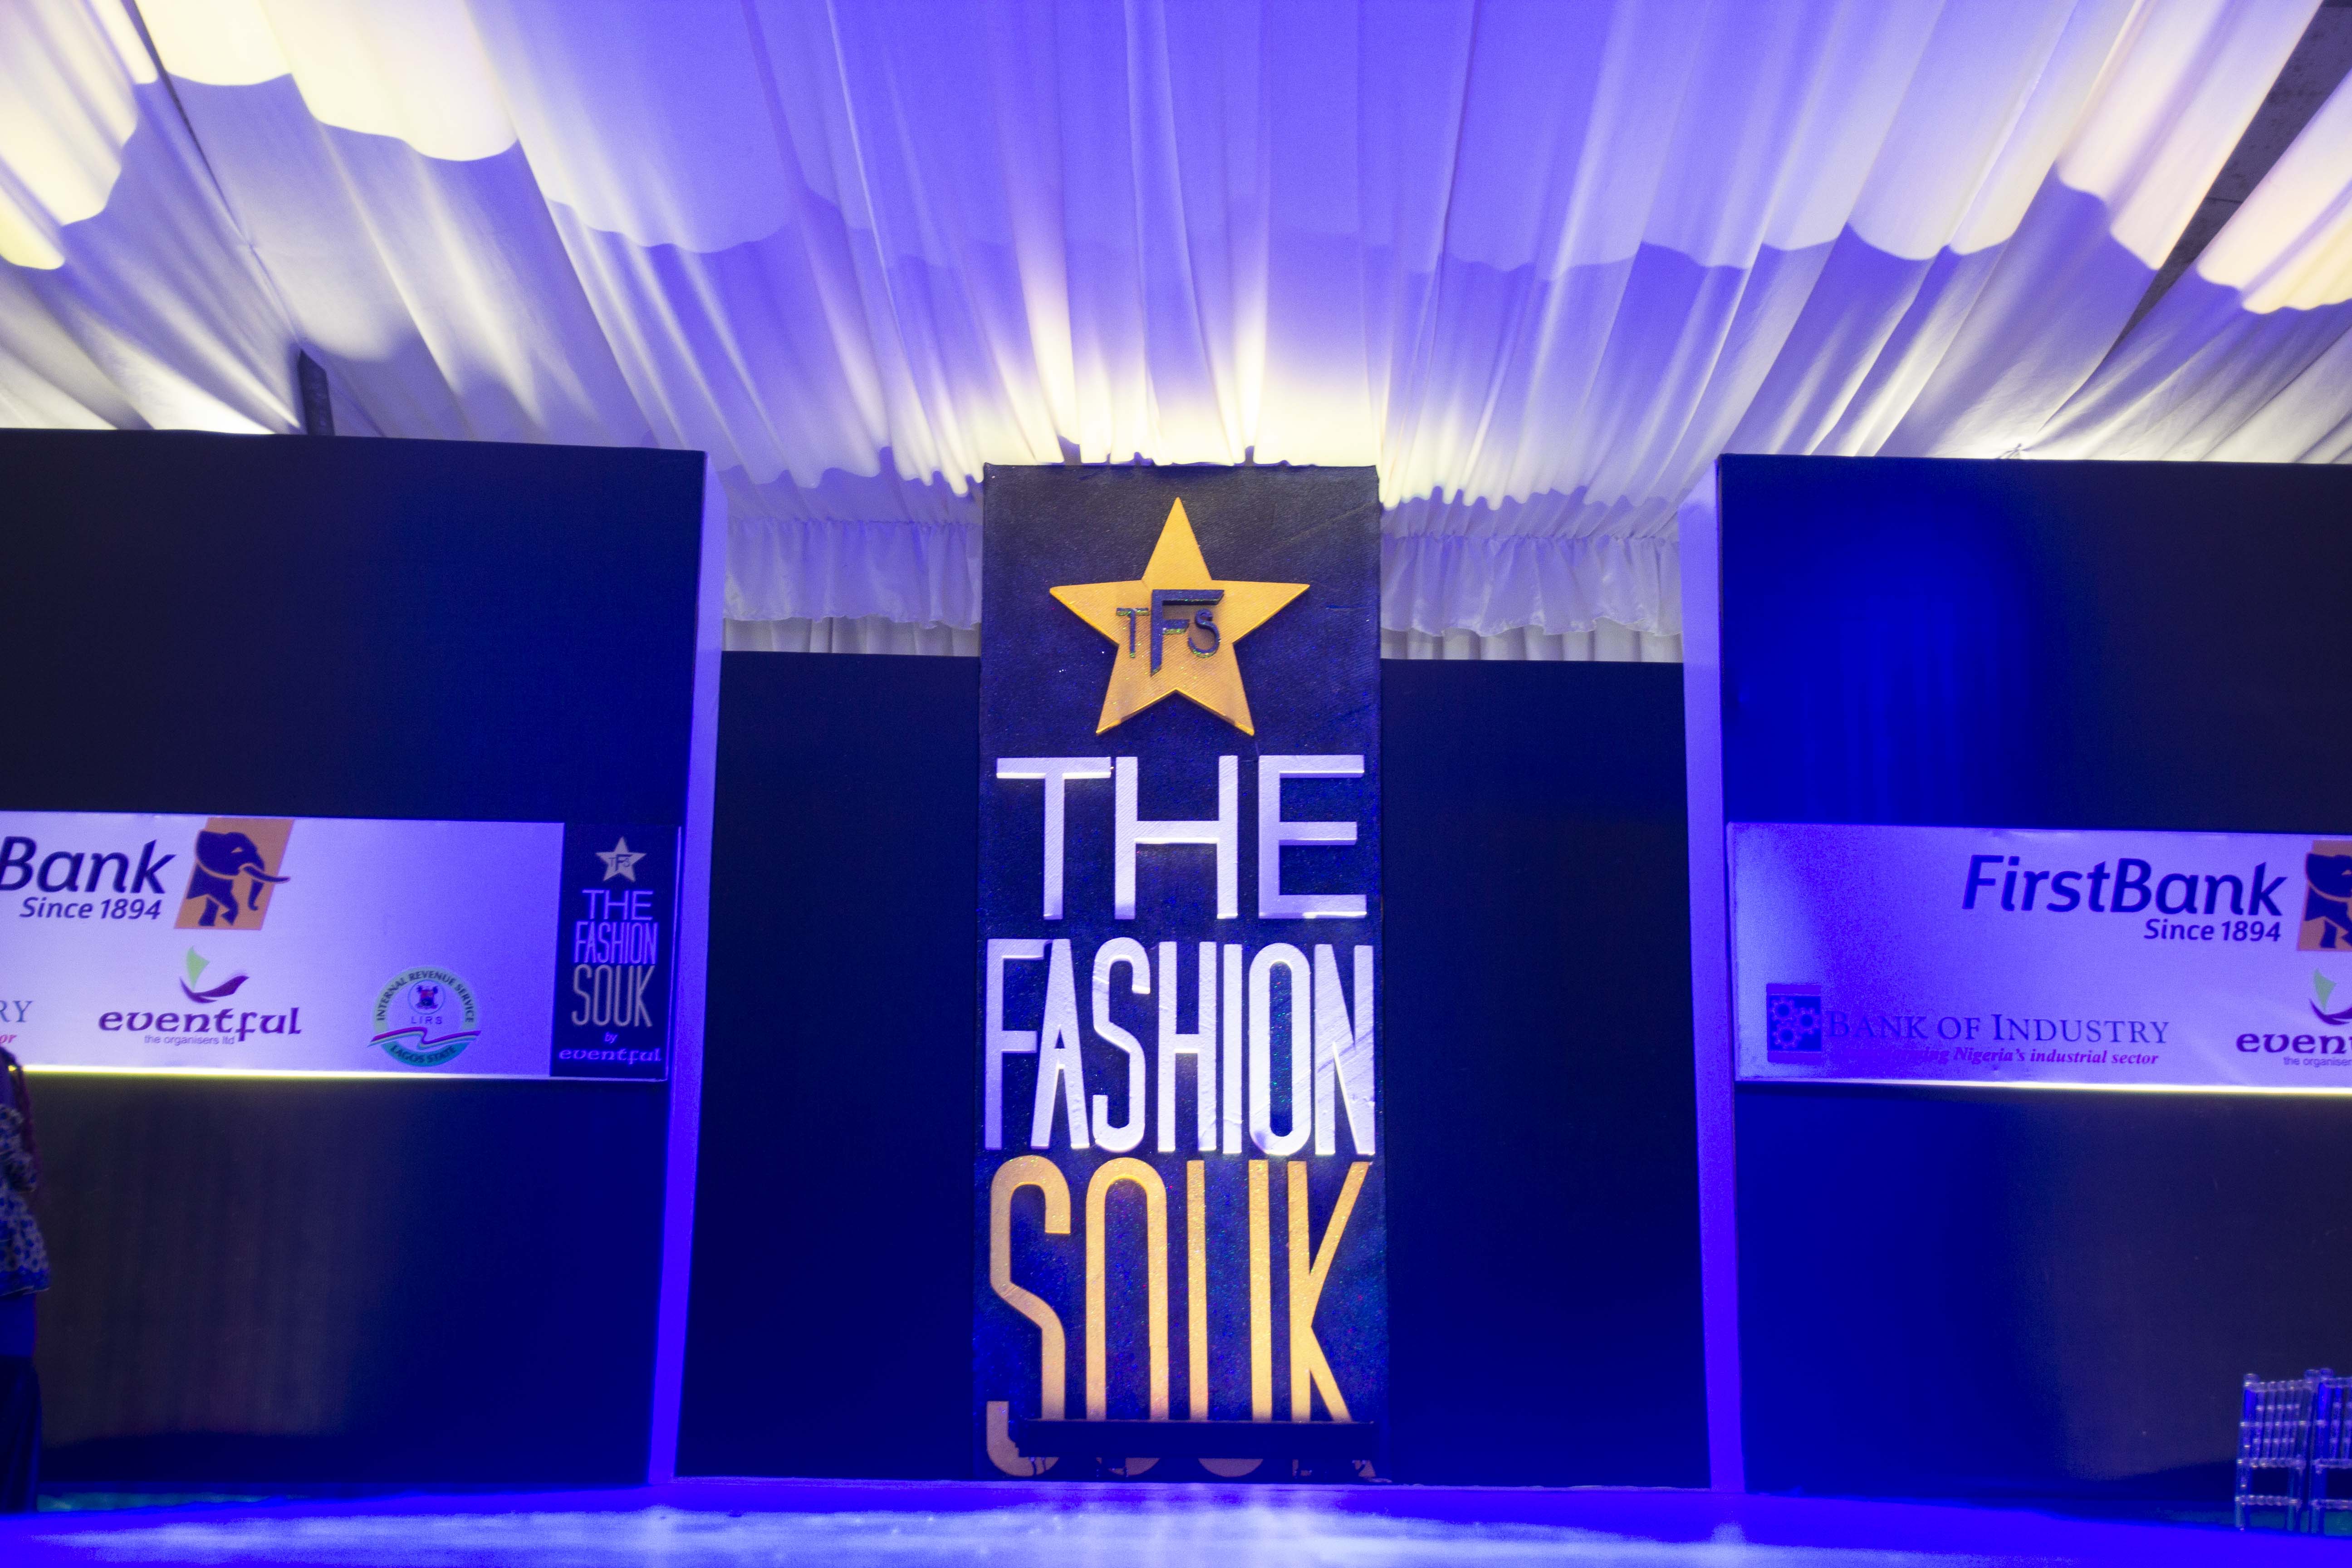 The Fashion Souk Stage/Runway